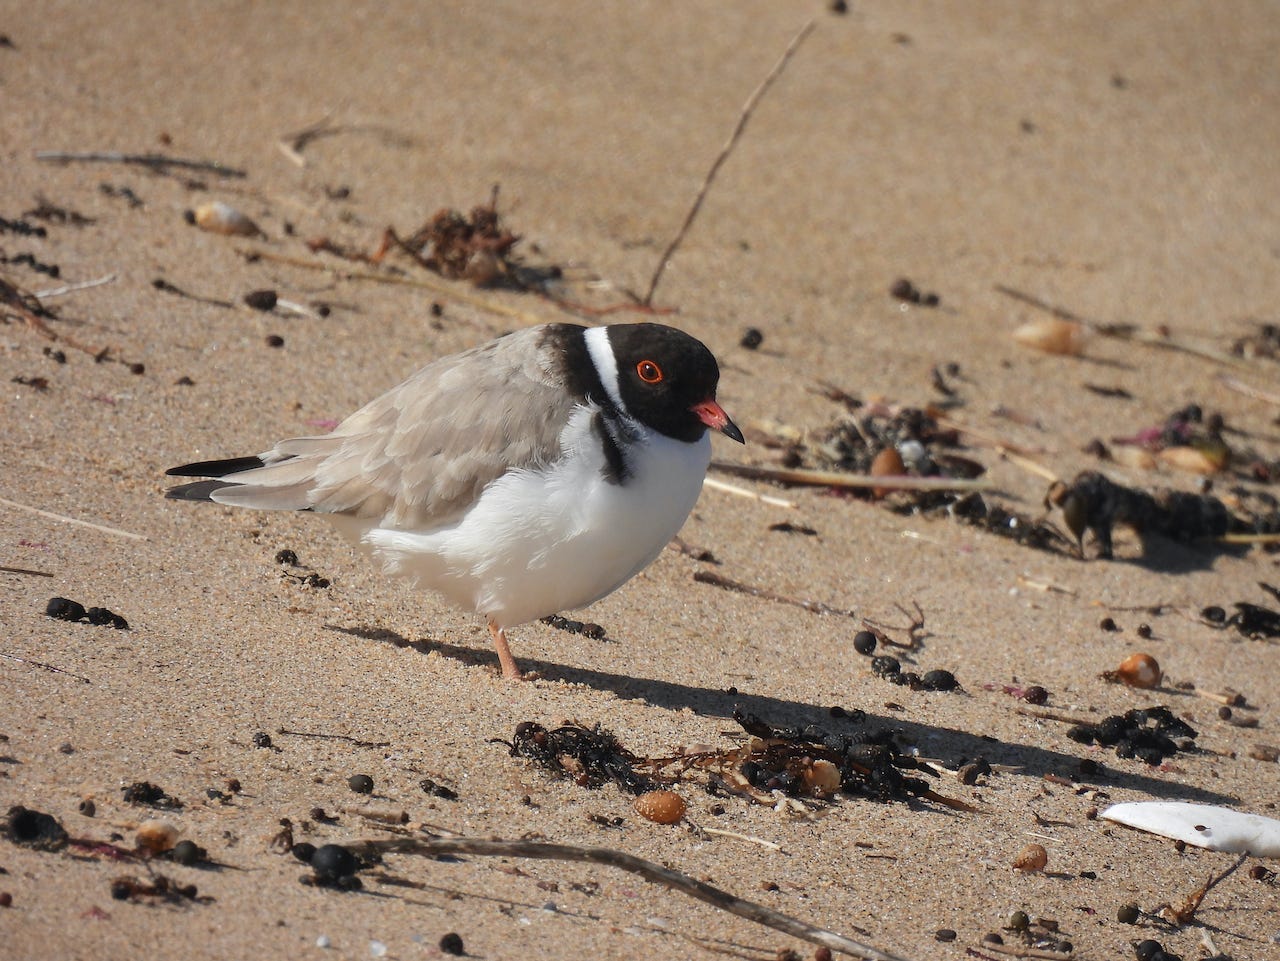 Adult hooded plover, a small Australian shorebird, on a sandy beach amid seaweed and cuttlefish.